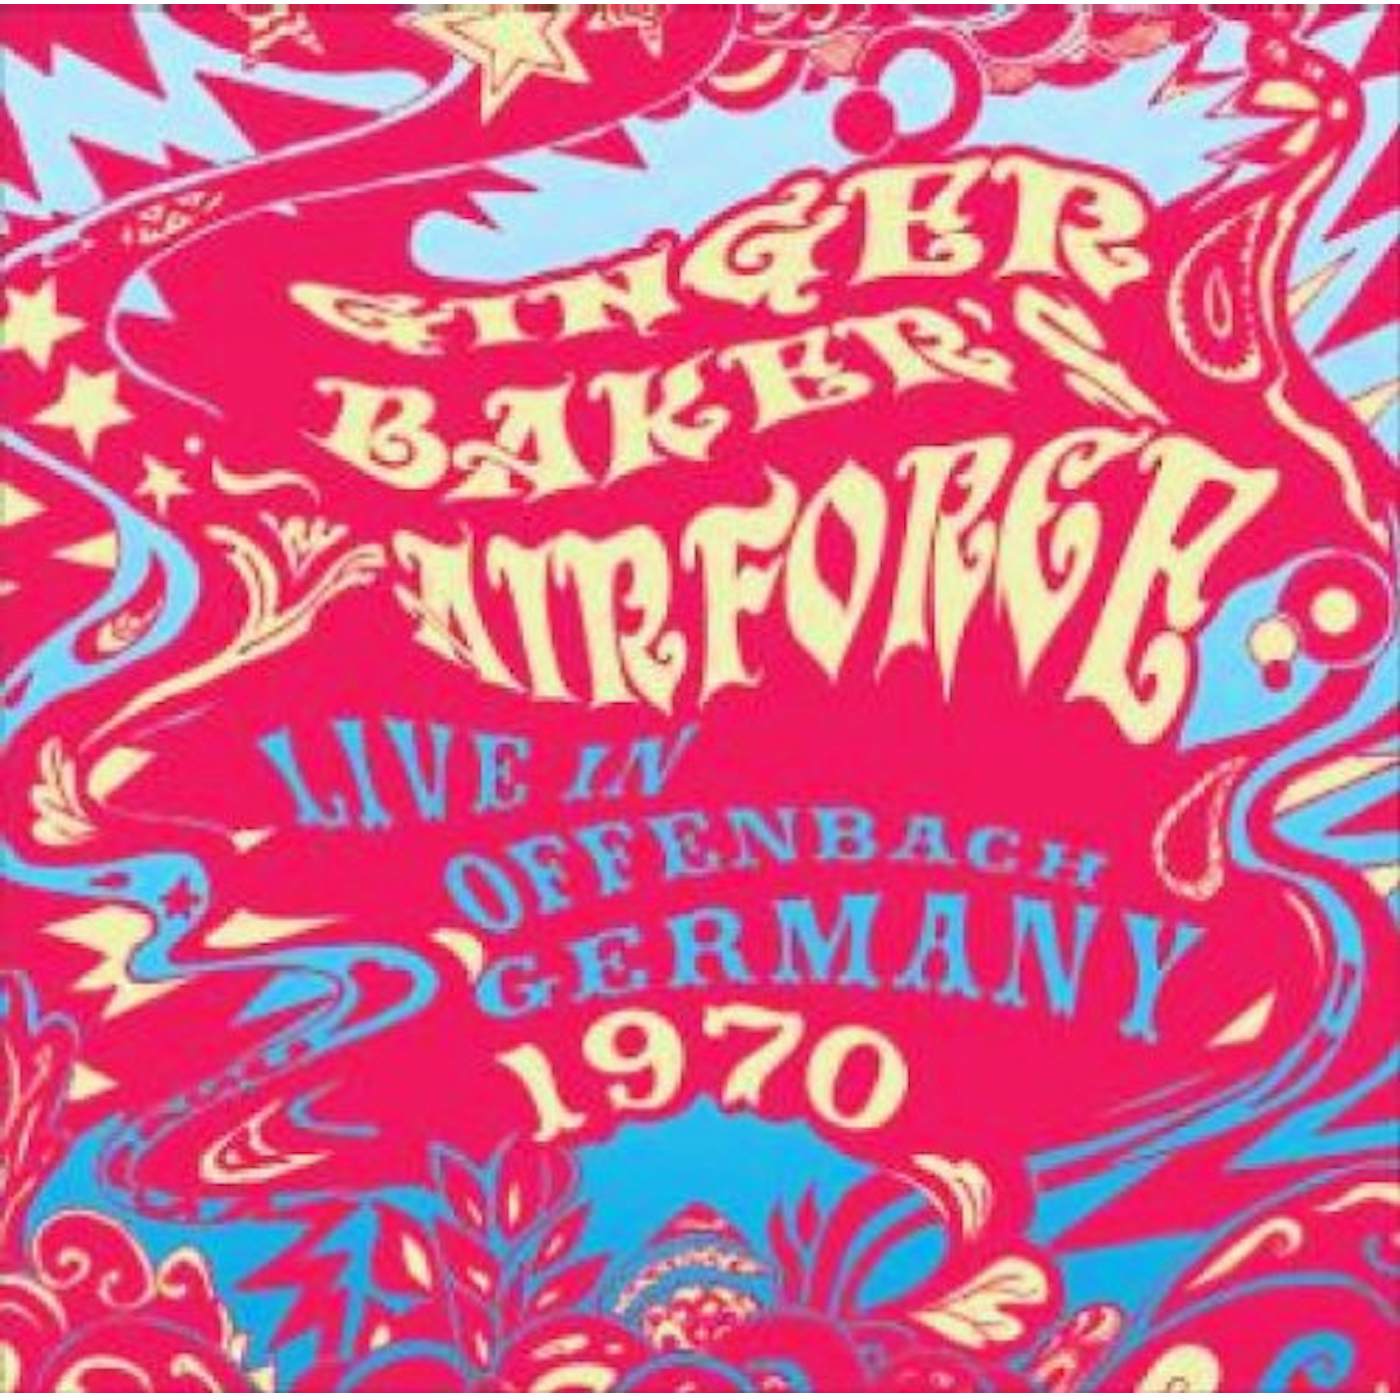 Ginger Baker LIVE IN OFFENBACH GERMANY 1970 CD